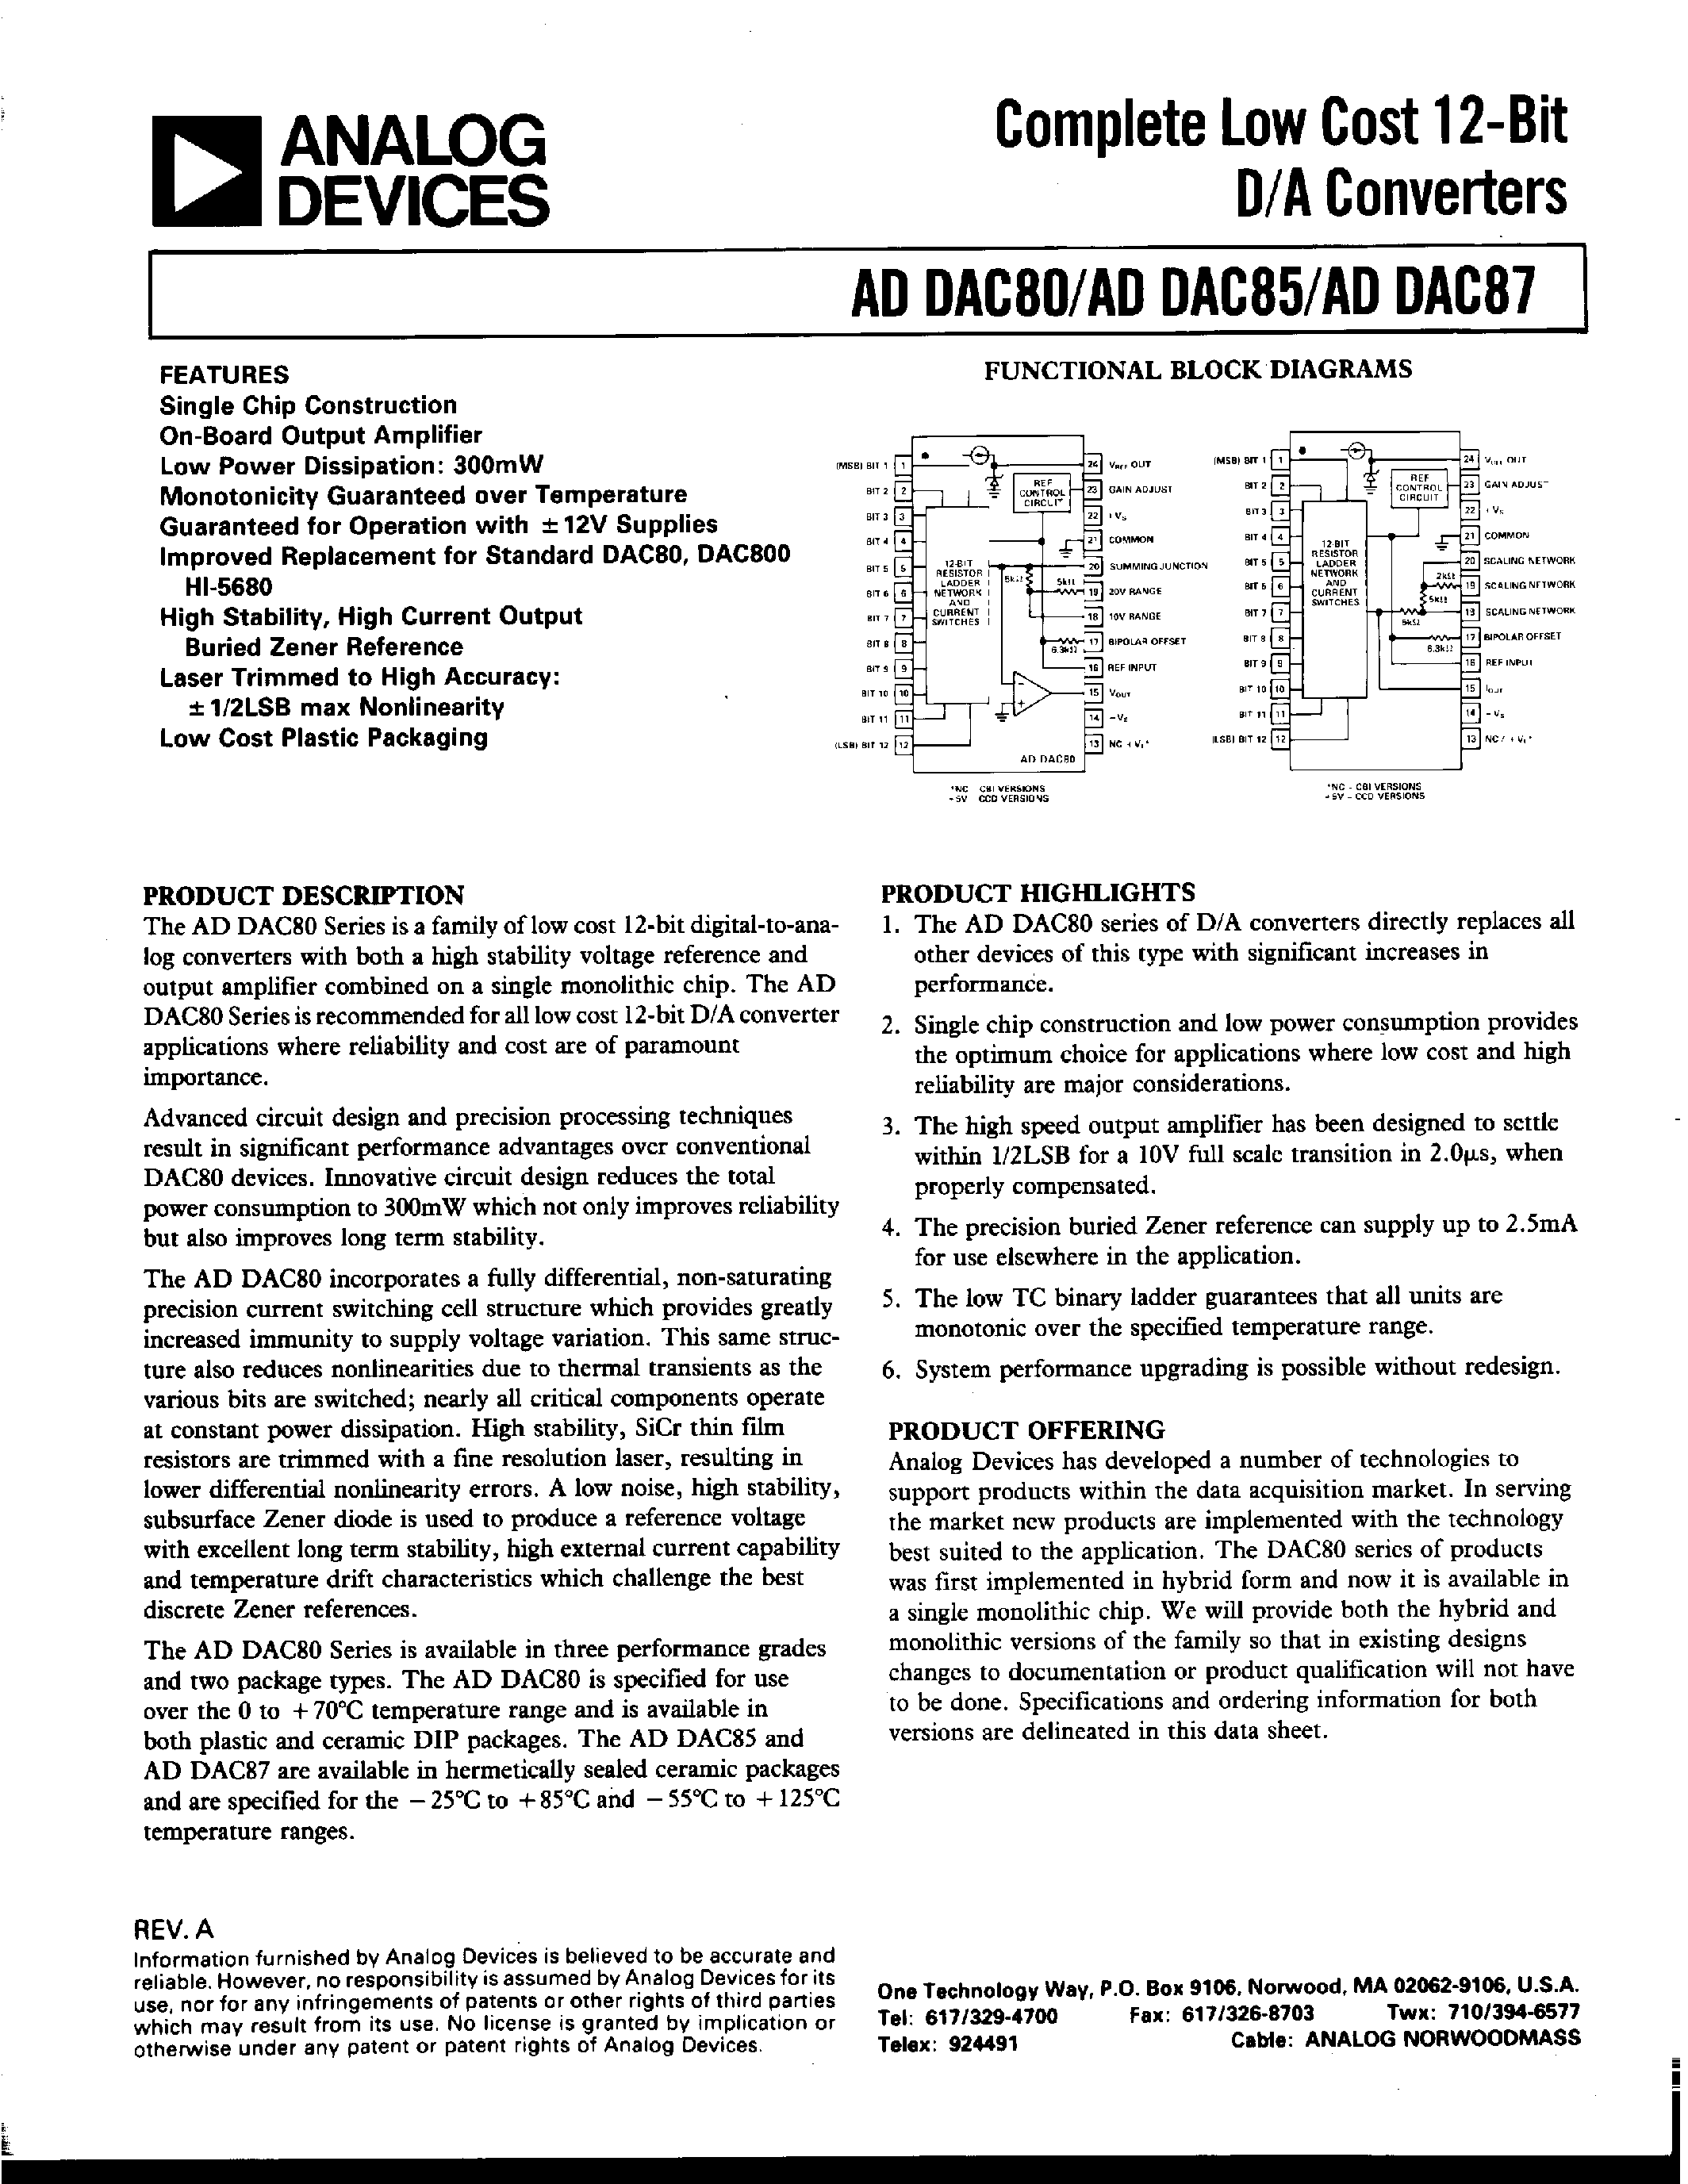 Datasheet ADDAC85LD-CBI-V - COMPLETE LOW COST 12-BIT D/A CONVERTERS page 1